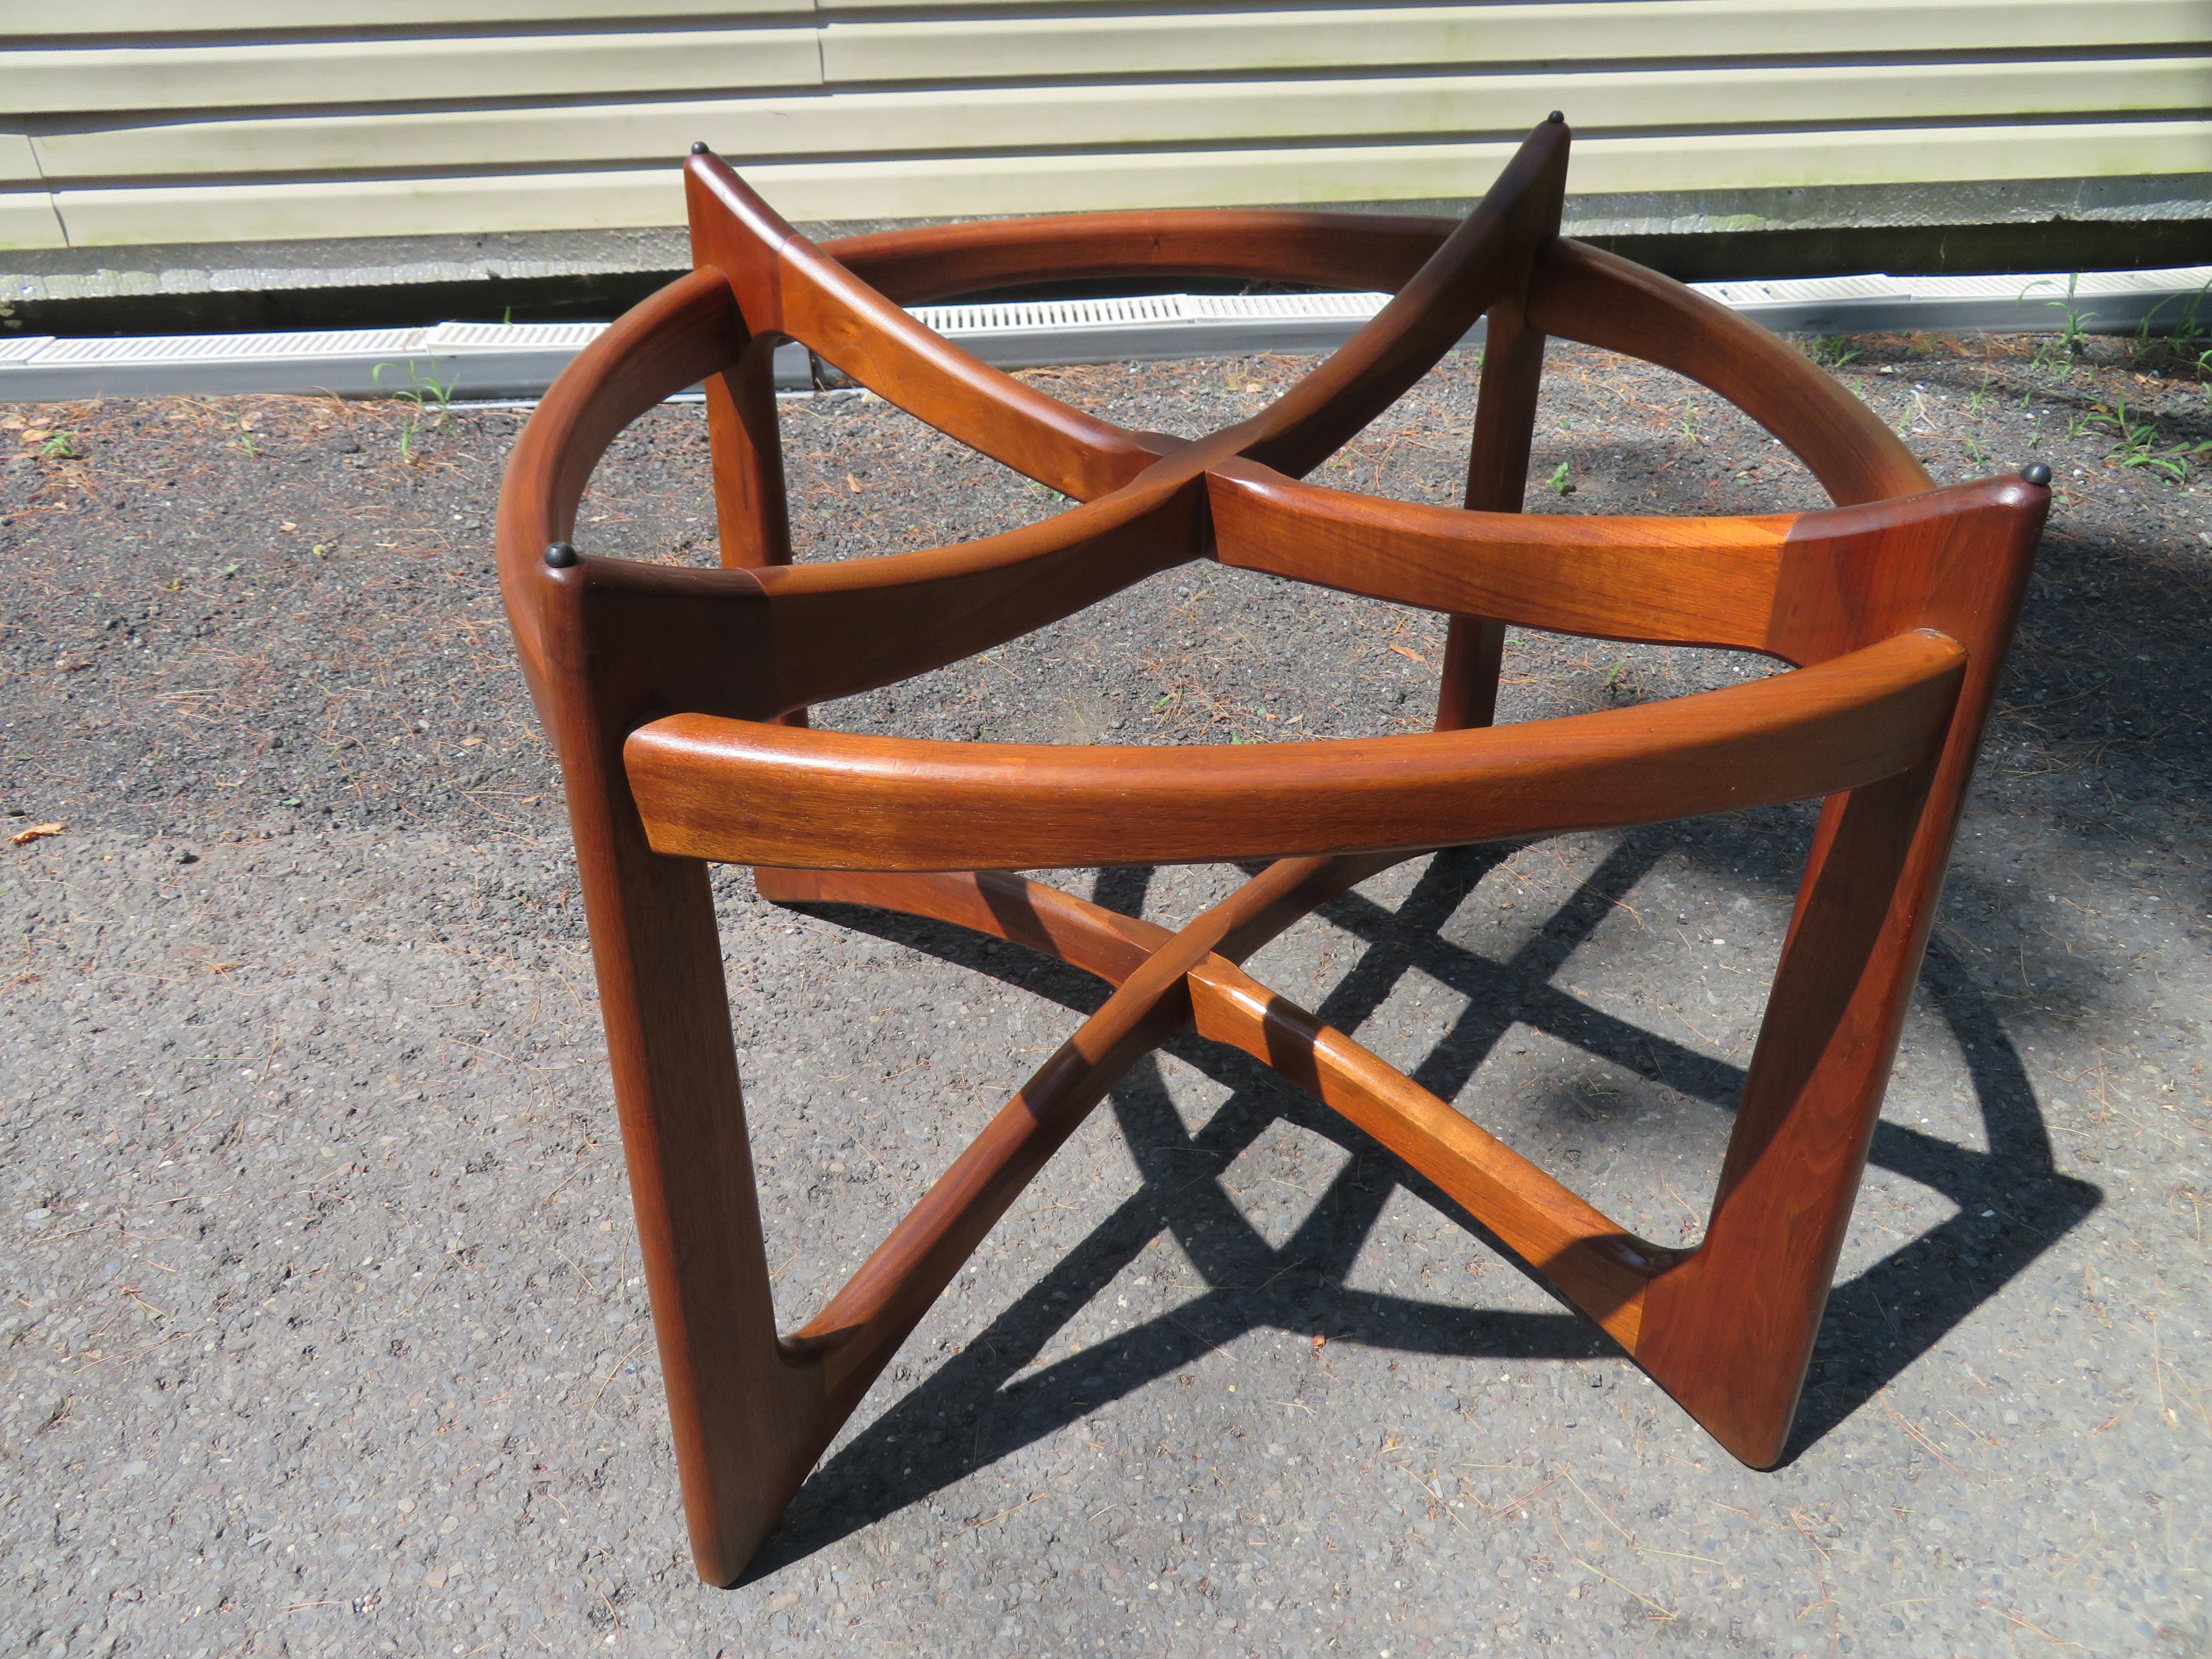 Gorgeous Adrian Pearsall sculptural walnut dining table. This piece is in fantastic vintage condition-sure to be a treasured addition to your mid-century-inspired home. Please see our huge collection of Adrian Pearsall-designed furniture listed in